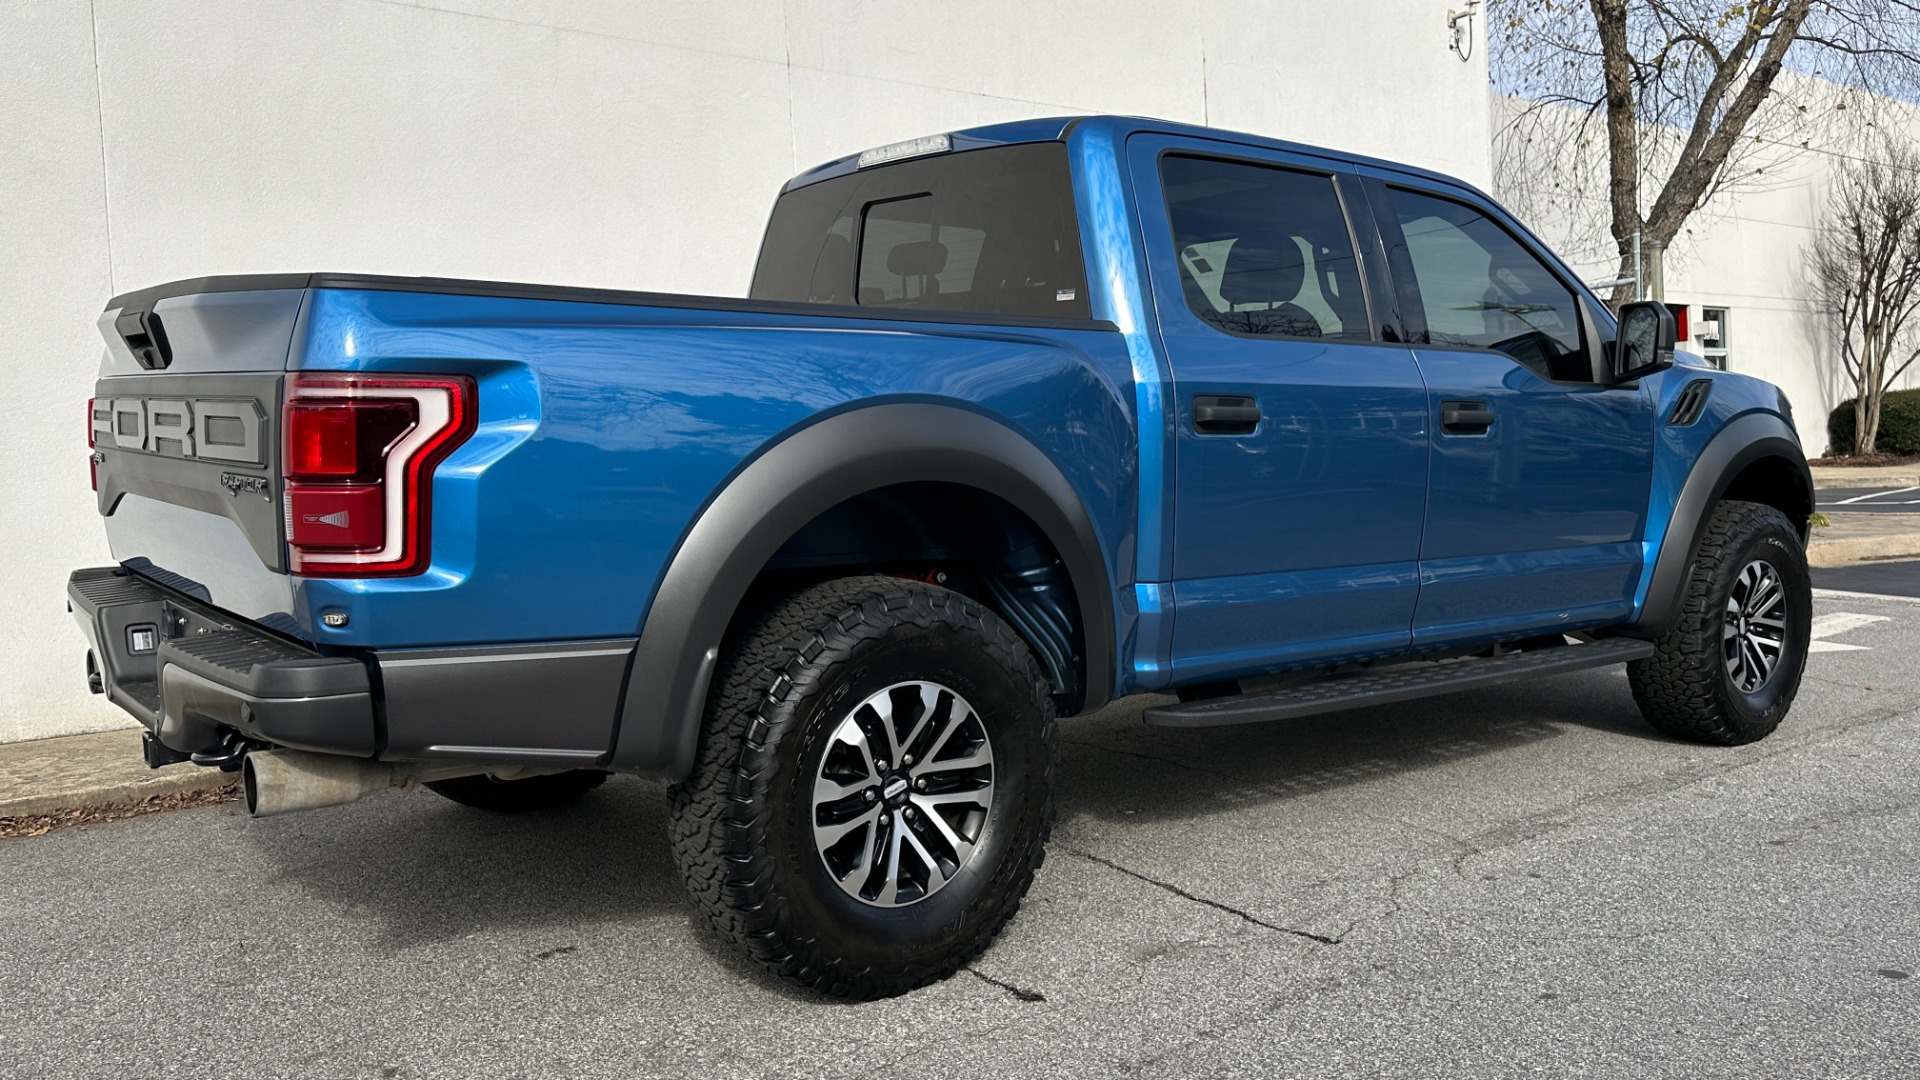 Used 2019 Ford F-150 RAPTOR / HIGH OUTPUT ECOBOOST / PANORAMIC ROOF / NAVIGATION / 802A PACKAGE  for sale $65,995 at Formula Imports in Charlotte NC 28227 4